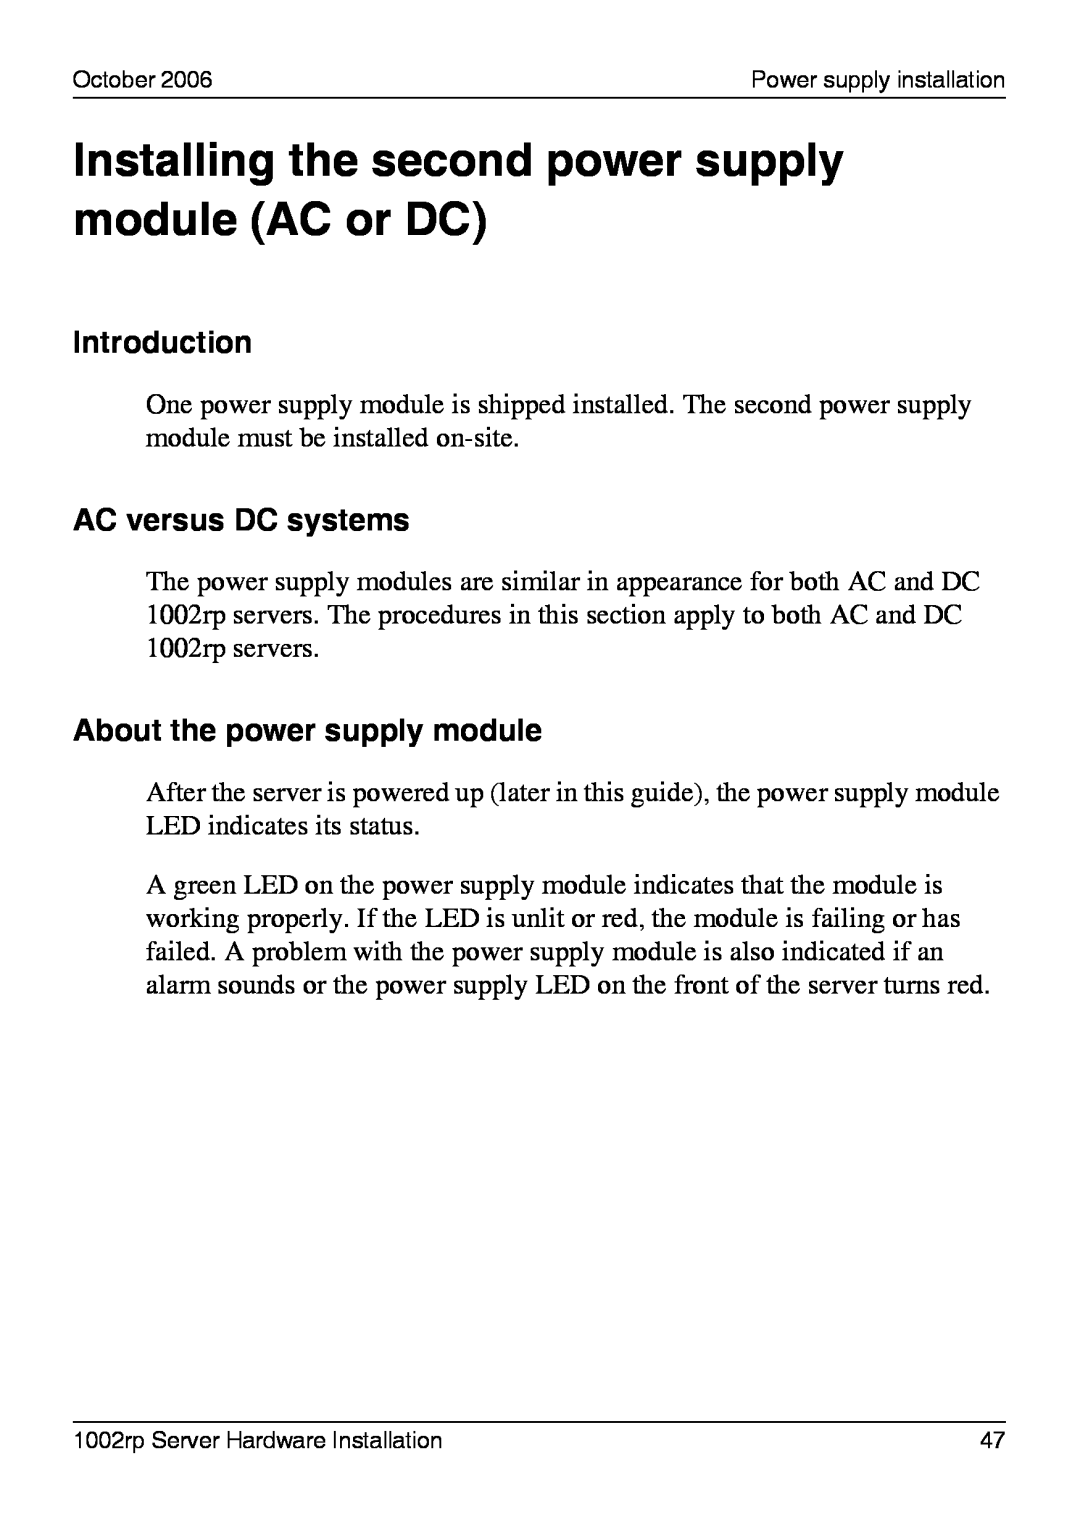 Nortel Networks 1002rp manual Installing the second power supply module AC or DC, AC versus DC systems, Introduction 